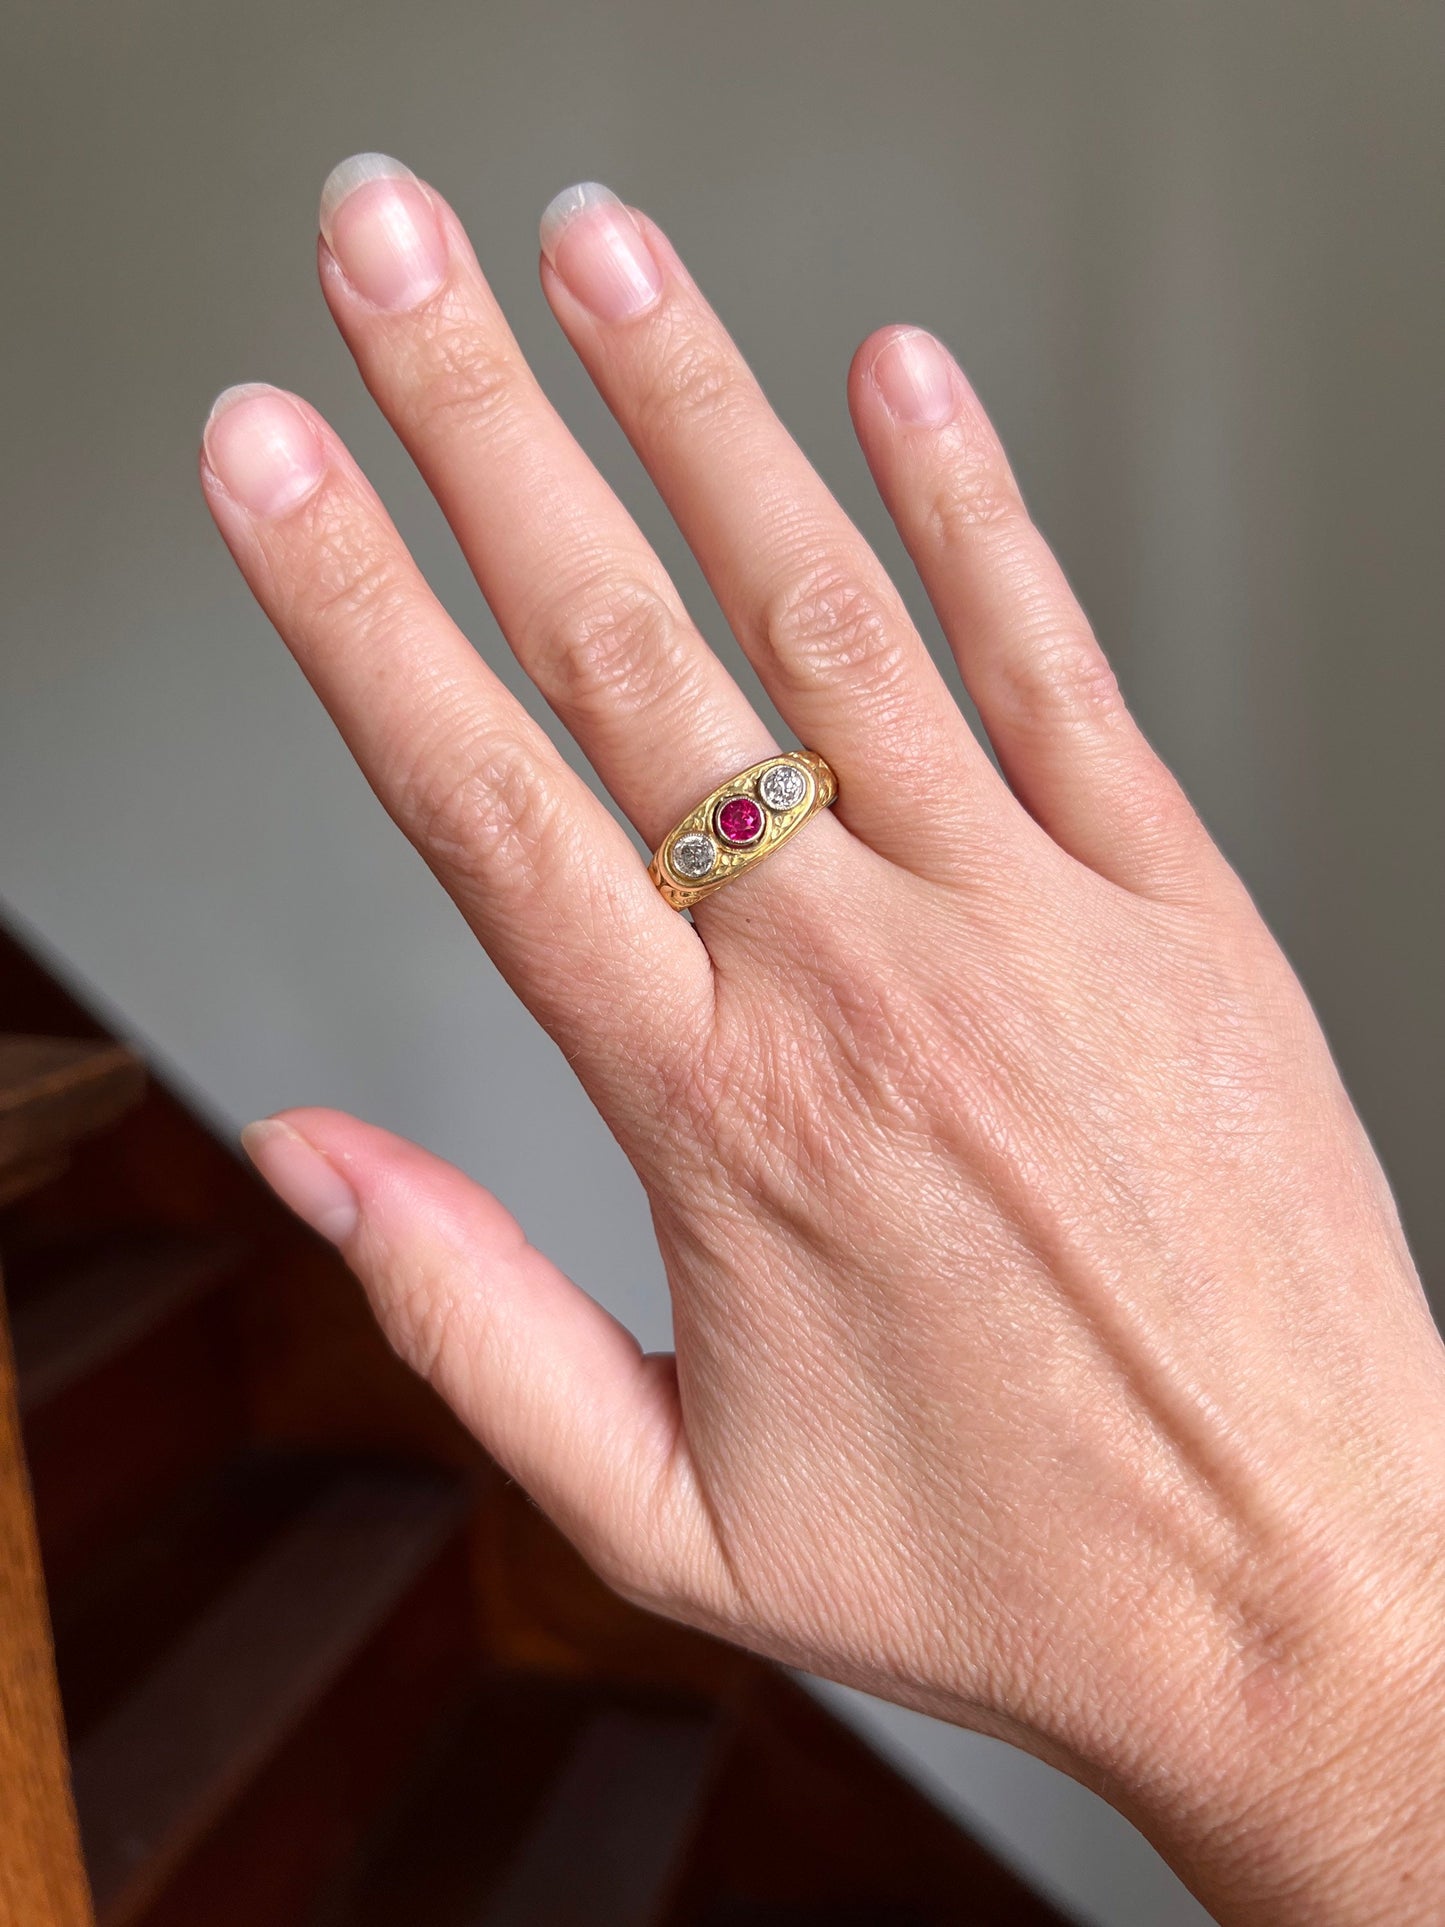 ROSES Heavy Ornate Embossed RUBY Old Mine Cut DIAMOND Gypsy Band Ring .45 Carat French Antique 9.6g 18k GoLD Victorian Belle Epoque Gift OmC